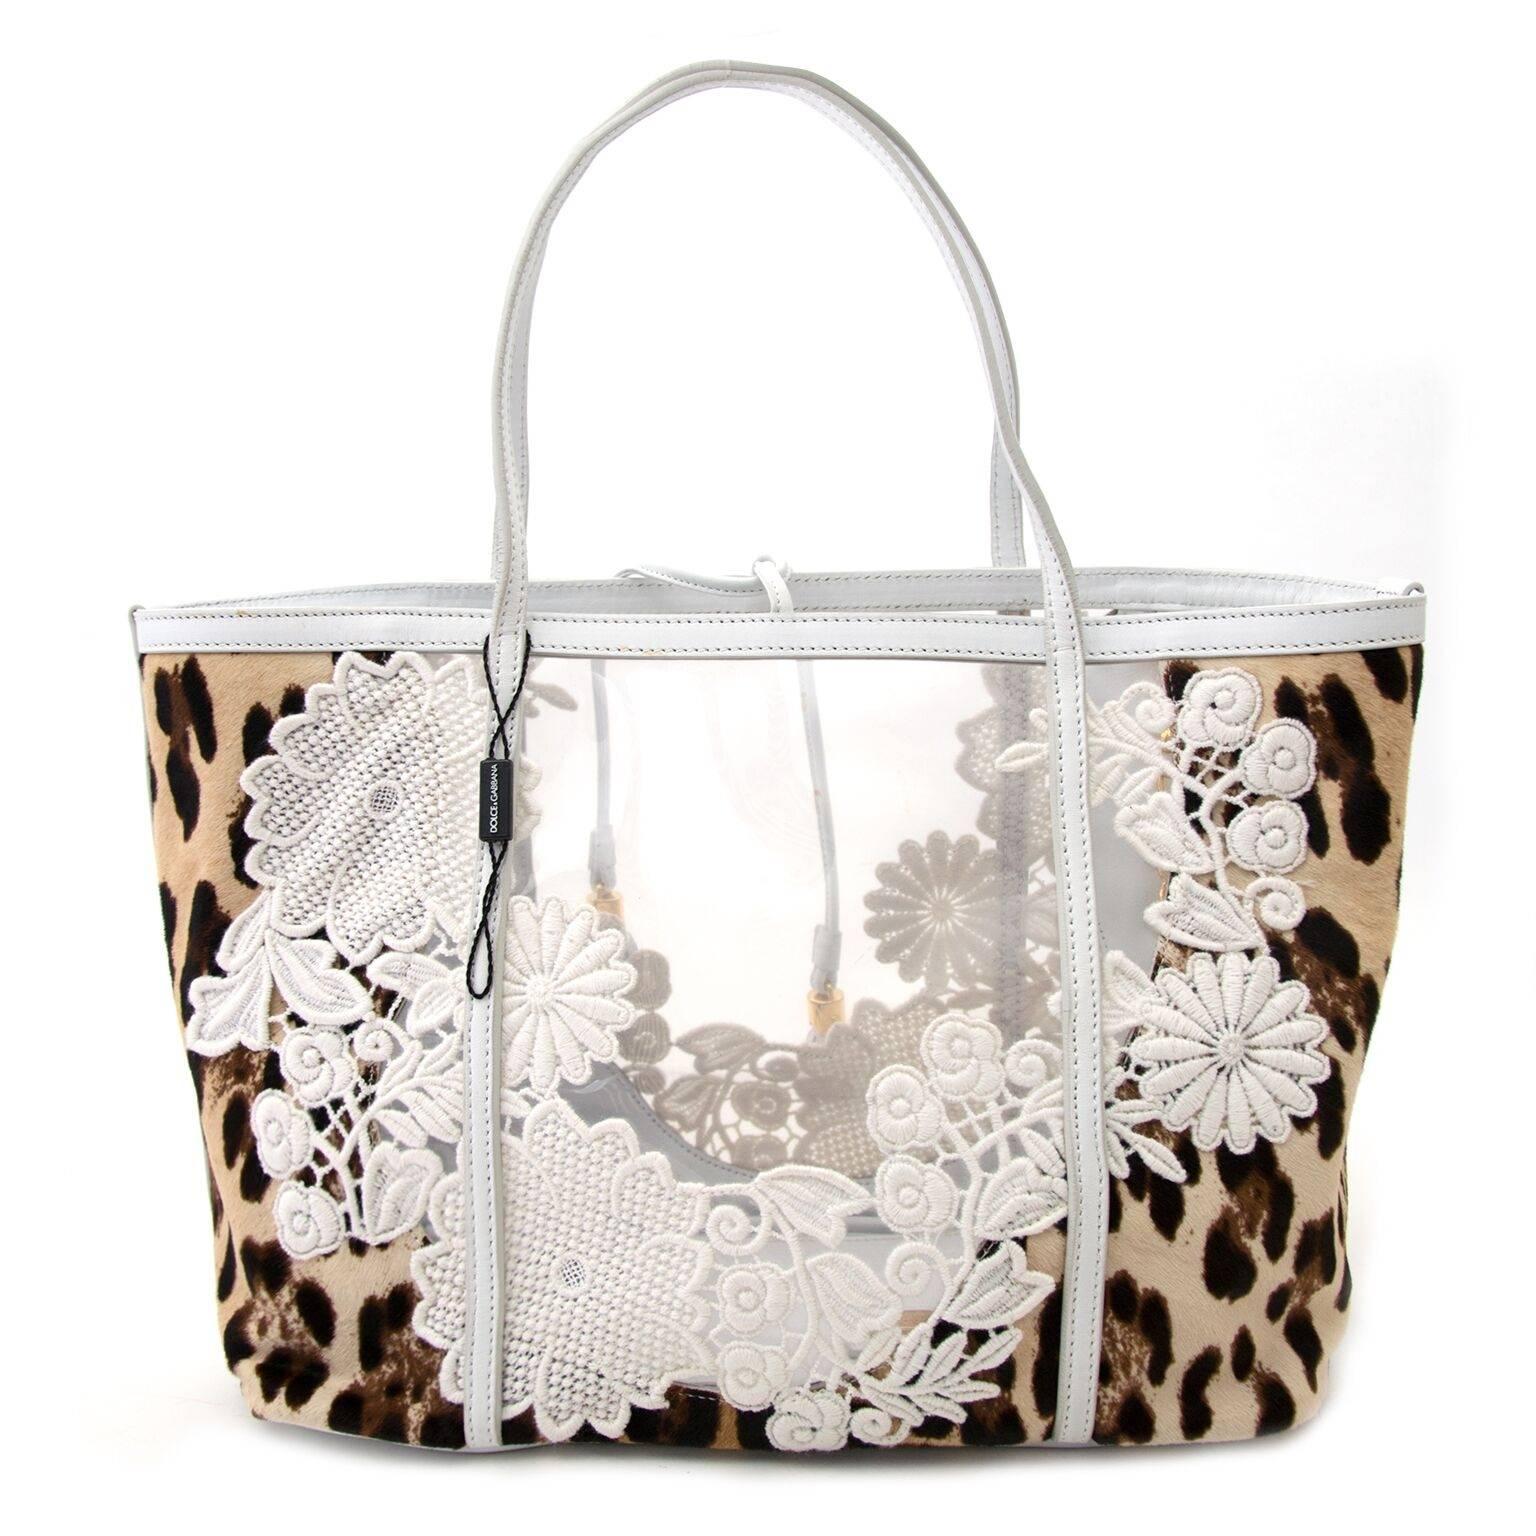 Good preloved condition

Dolce & Gabbana Escape Leopard Print

Trend Alert ; Plastic see-through , seen at Chanel, Delvaux and D&G runway. 
This stunning tote by Dolce and Gabanna is finished with leopard ponyhair and white lace.
The inside offers